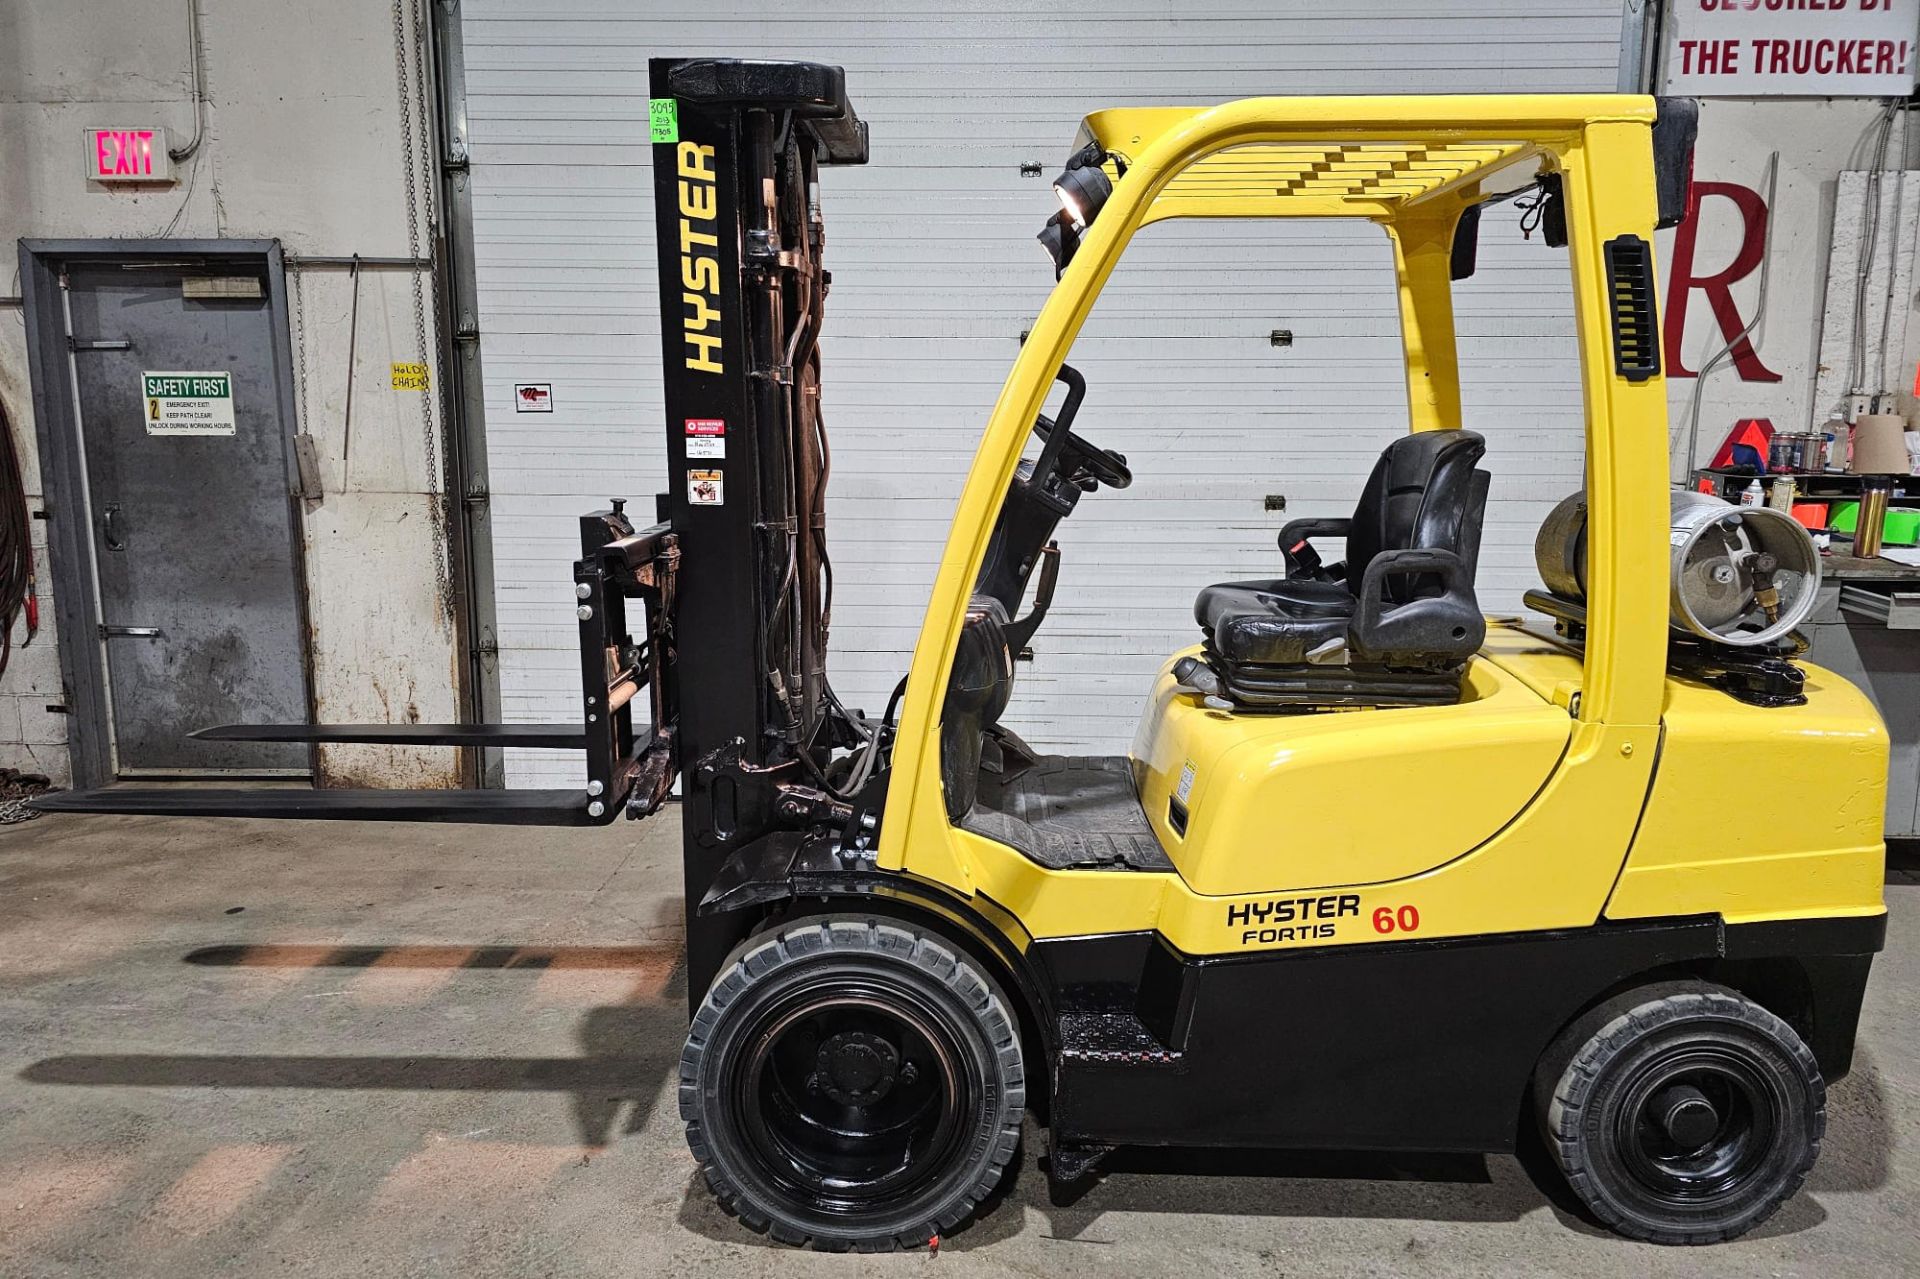 2013 Hyster 6,000lbs Capacity LPG (Propane) OUTDOOR Forklift 3-STAGE MAST 187" load height sideshift